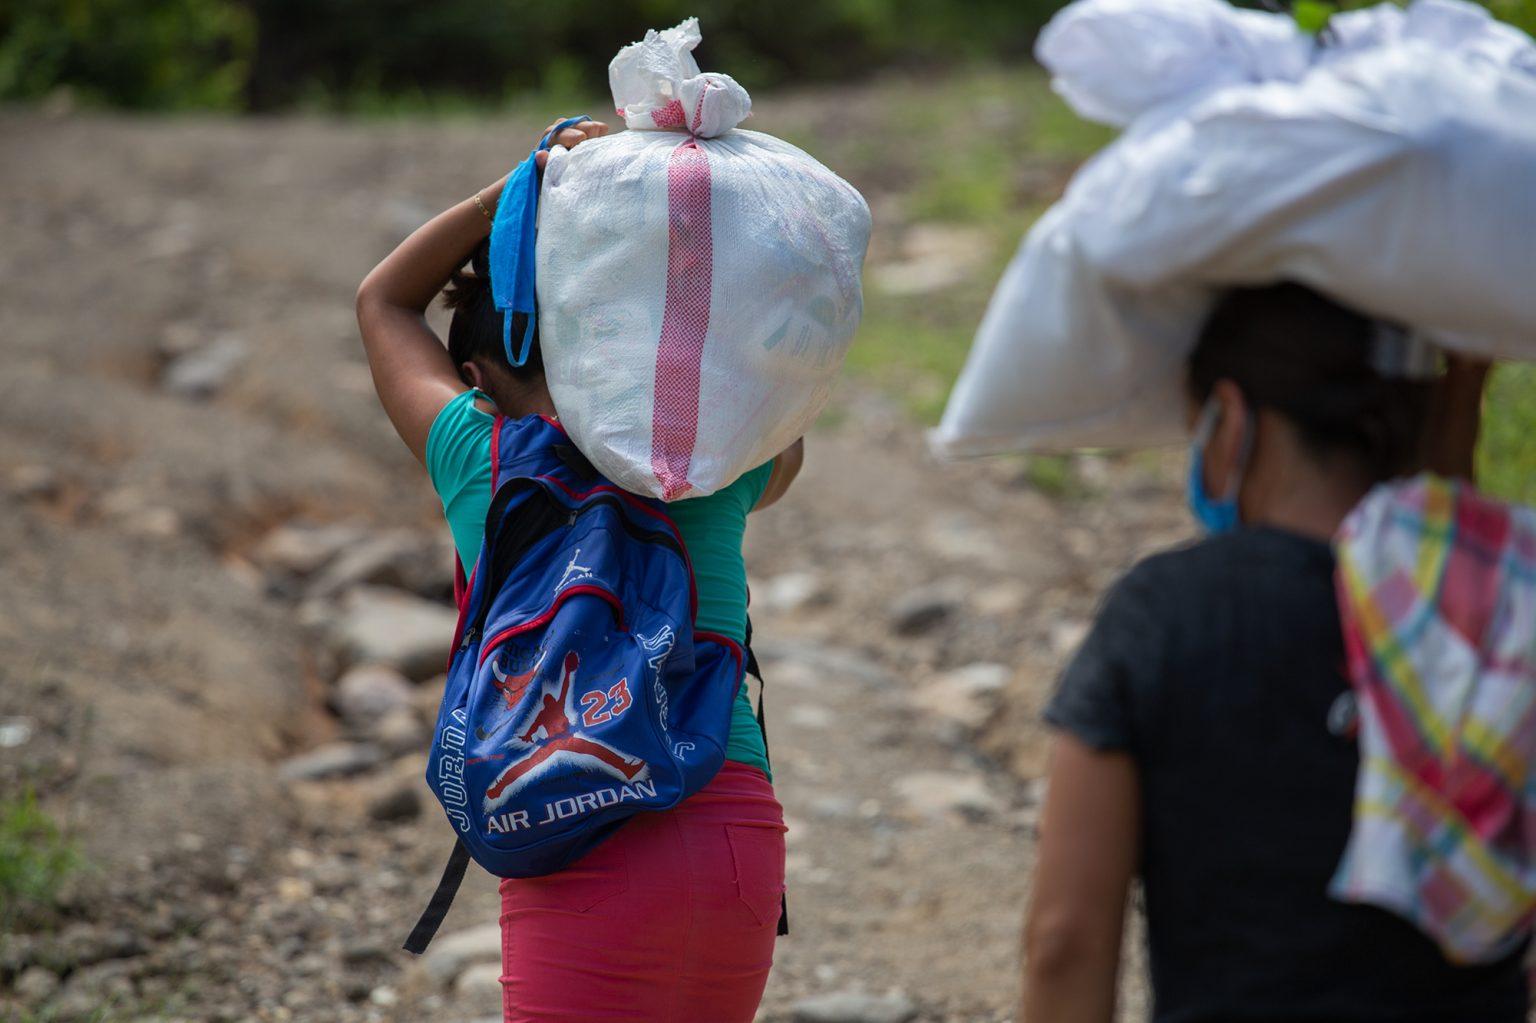 Two women who have divided the load walk to their homes, located at least an hour from the drop off location. This help – although small – will help feed their families for at least 15 days. Aguanqueterique, La Paz, August 29 2020. Photo: Martín Cálix